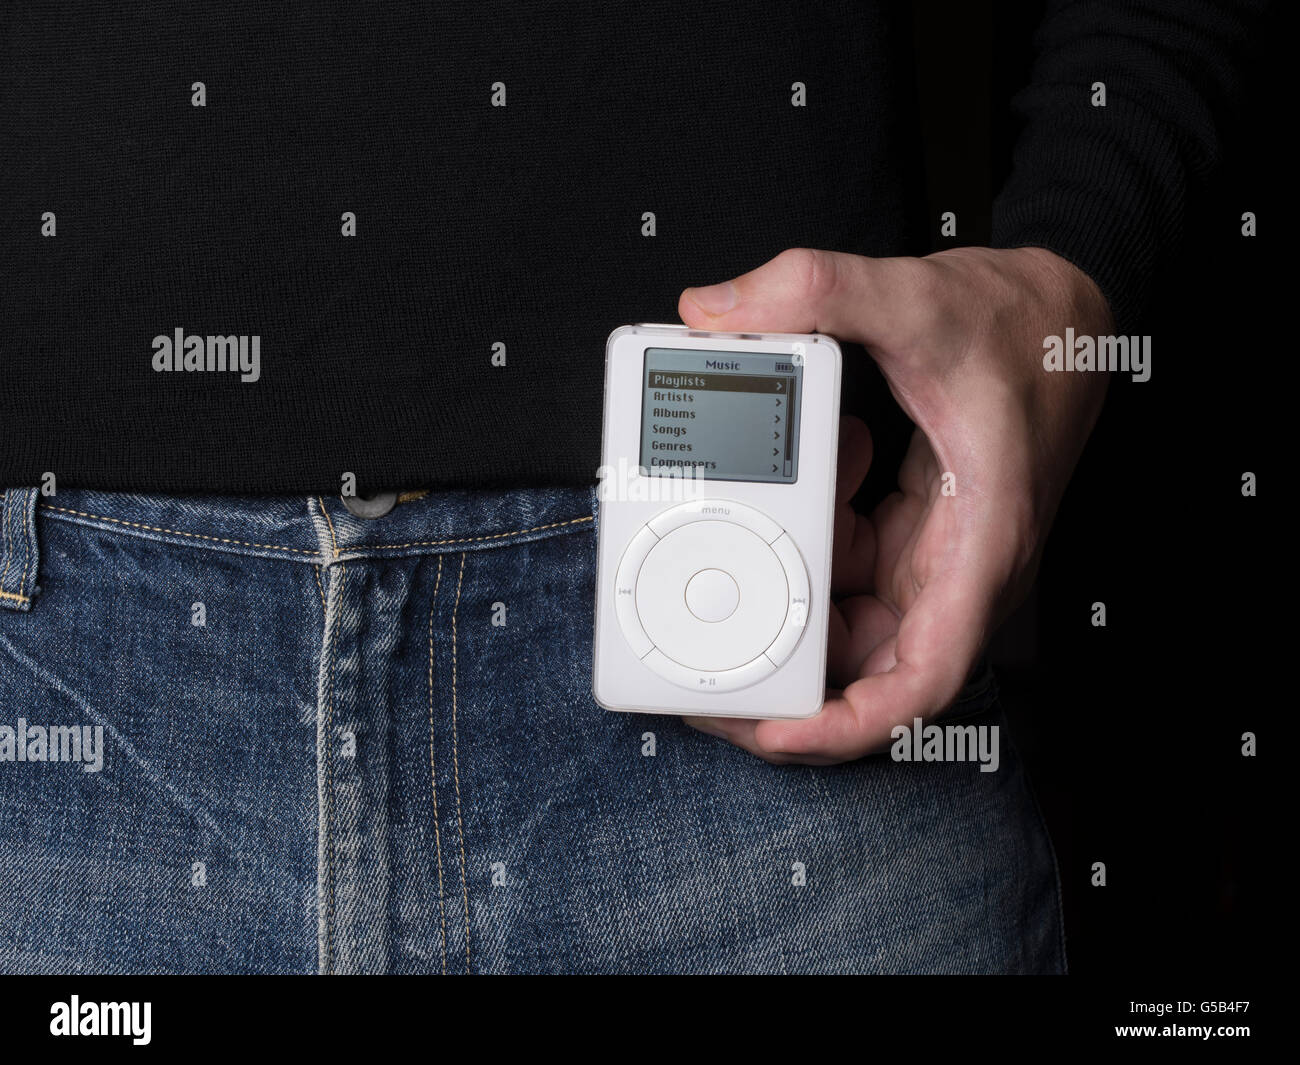 Apple iPod First generation, with mechanical scroll wheel. released October 23, 2001 Stock Photo